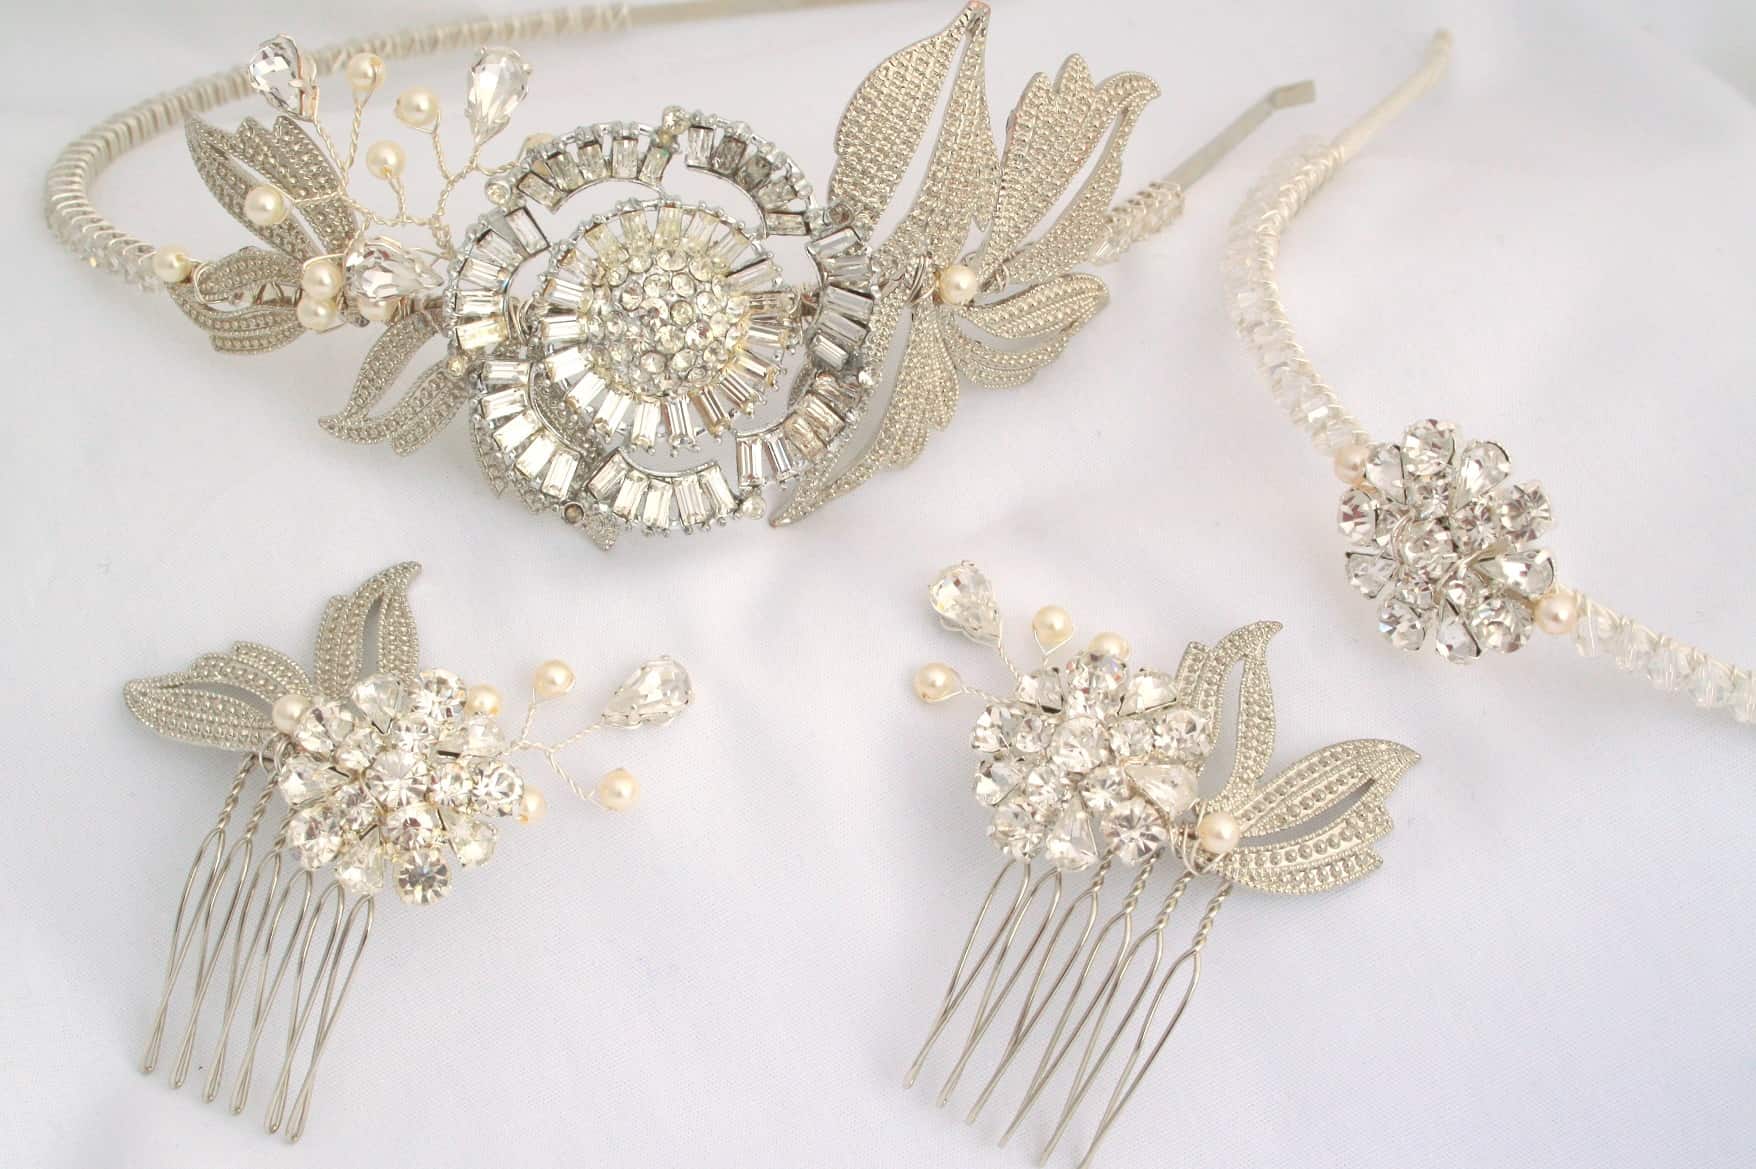 A range of bridal headwear in silver with jewels